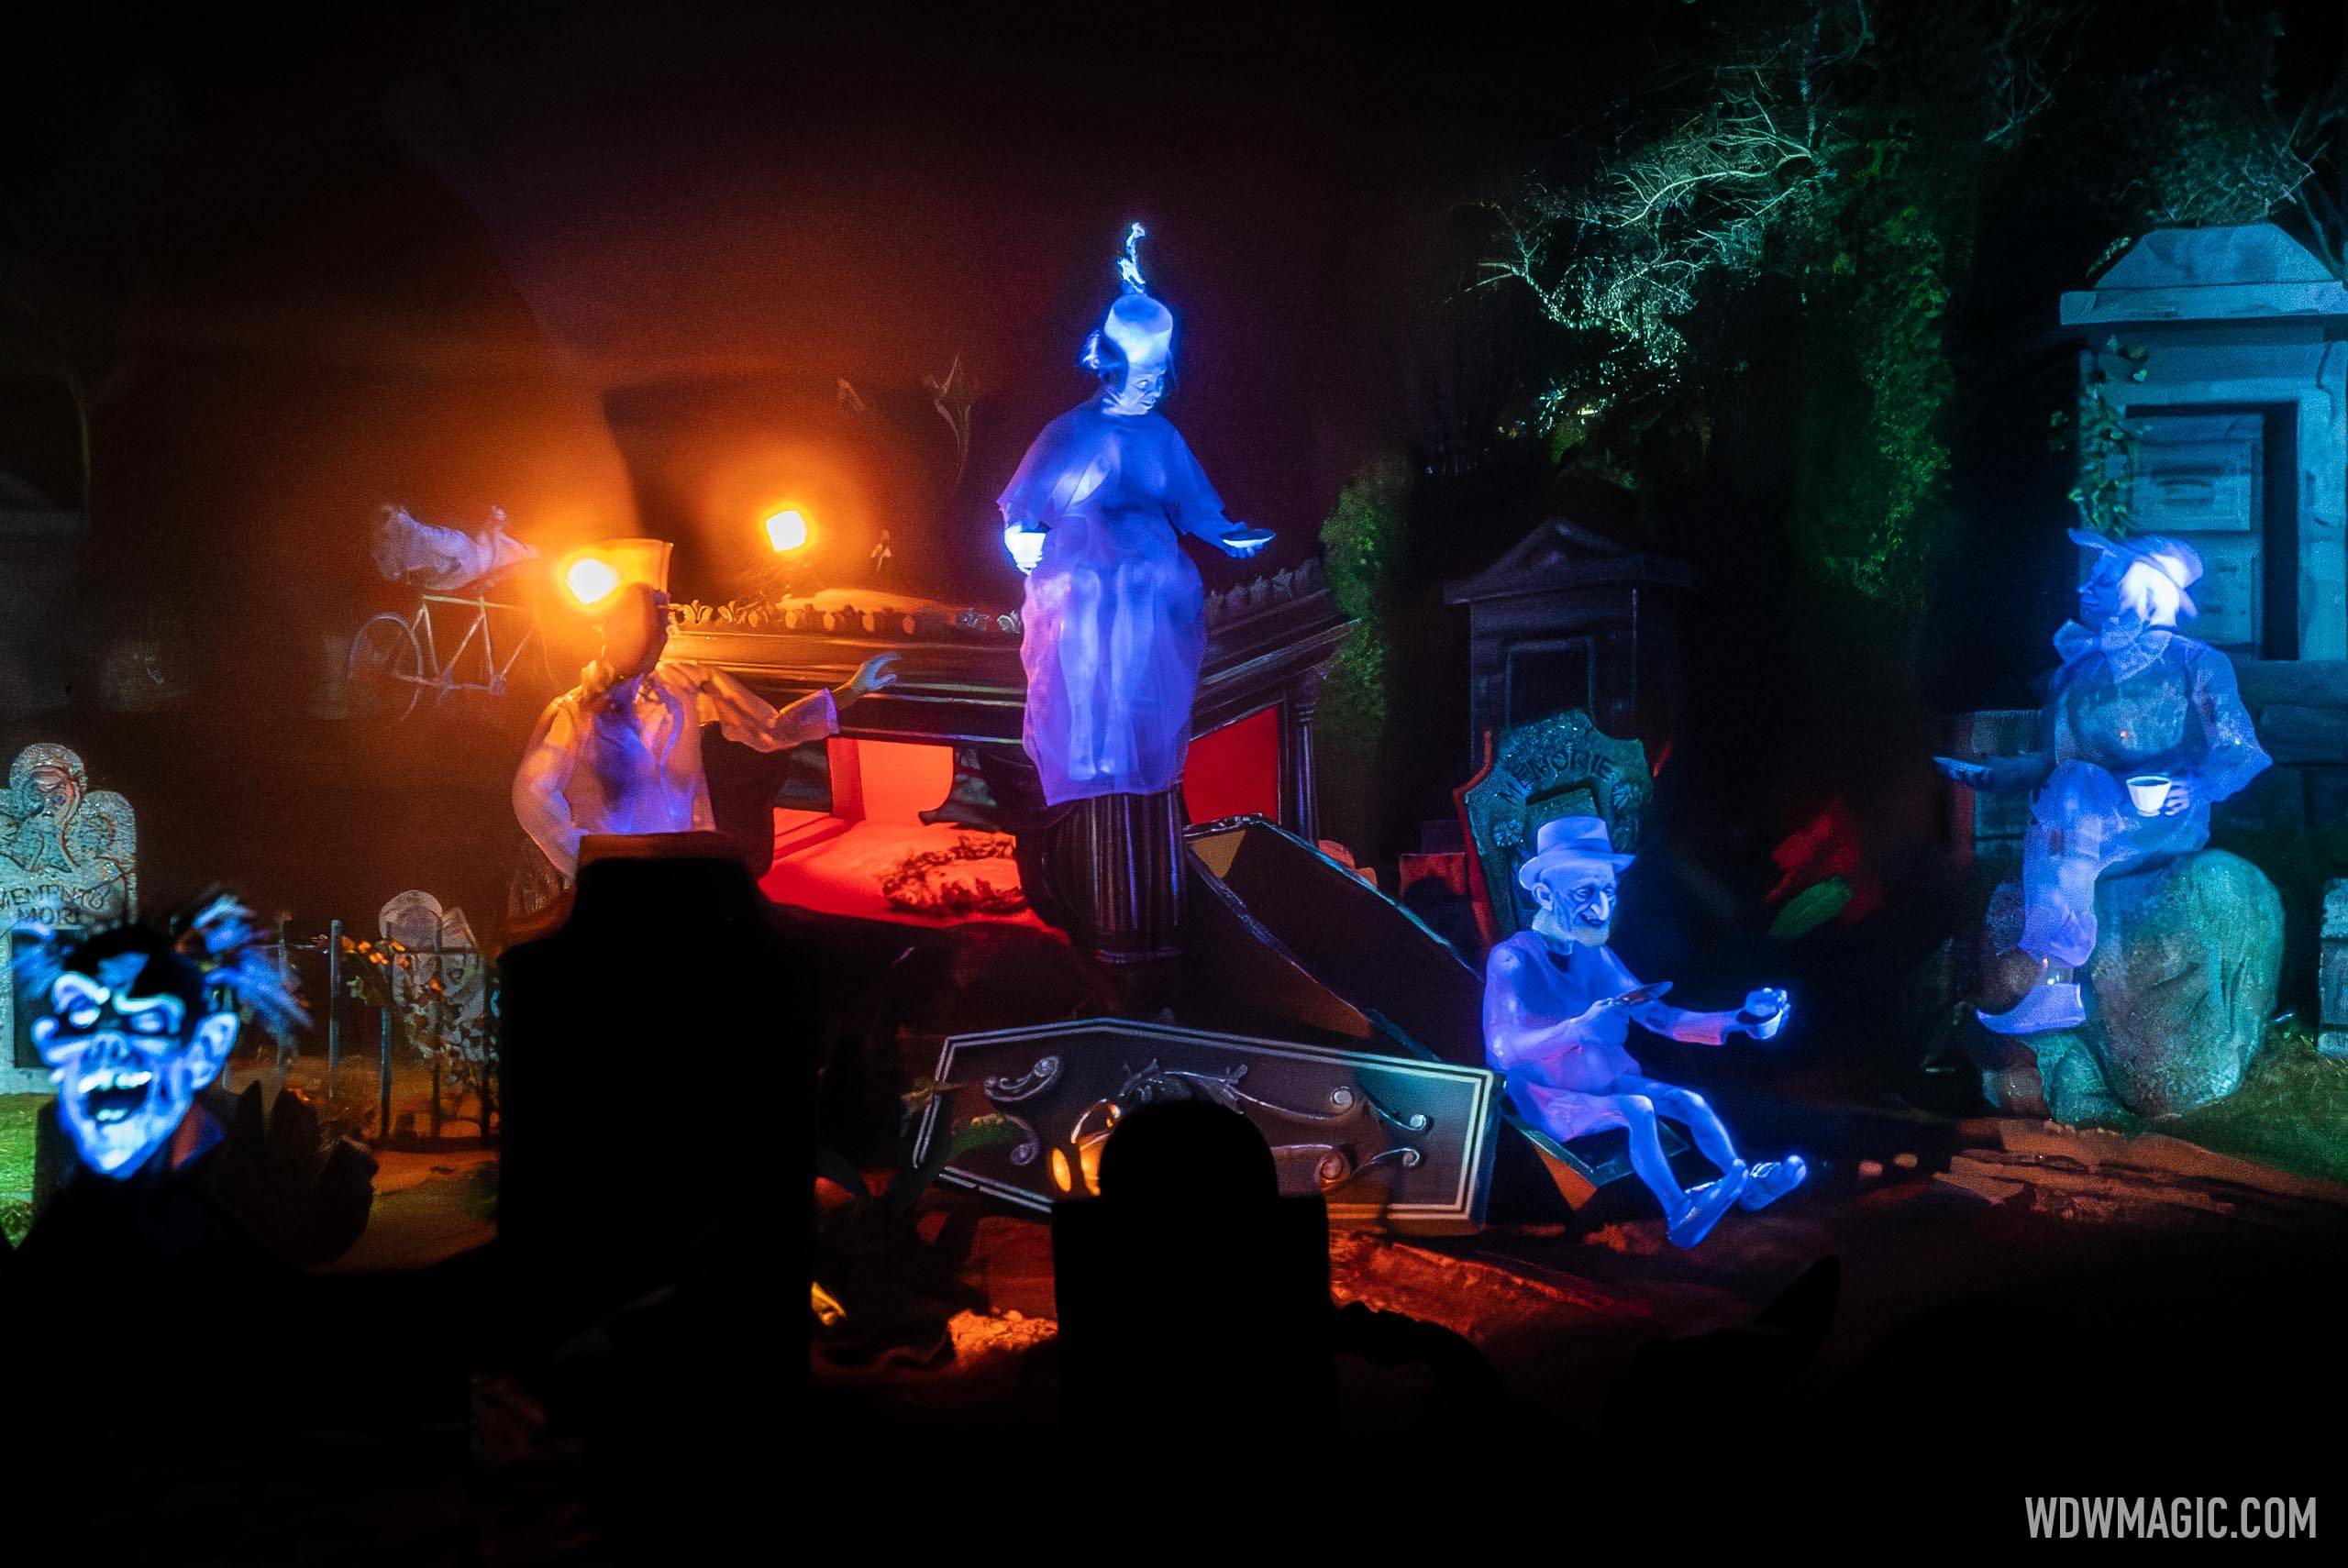 Interactive queue elements and more enhancements now being added to the Haunted Mansion